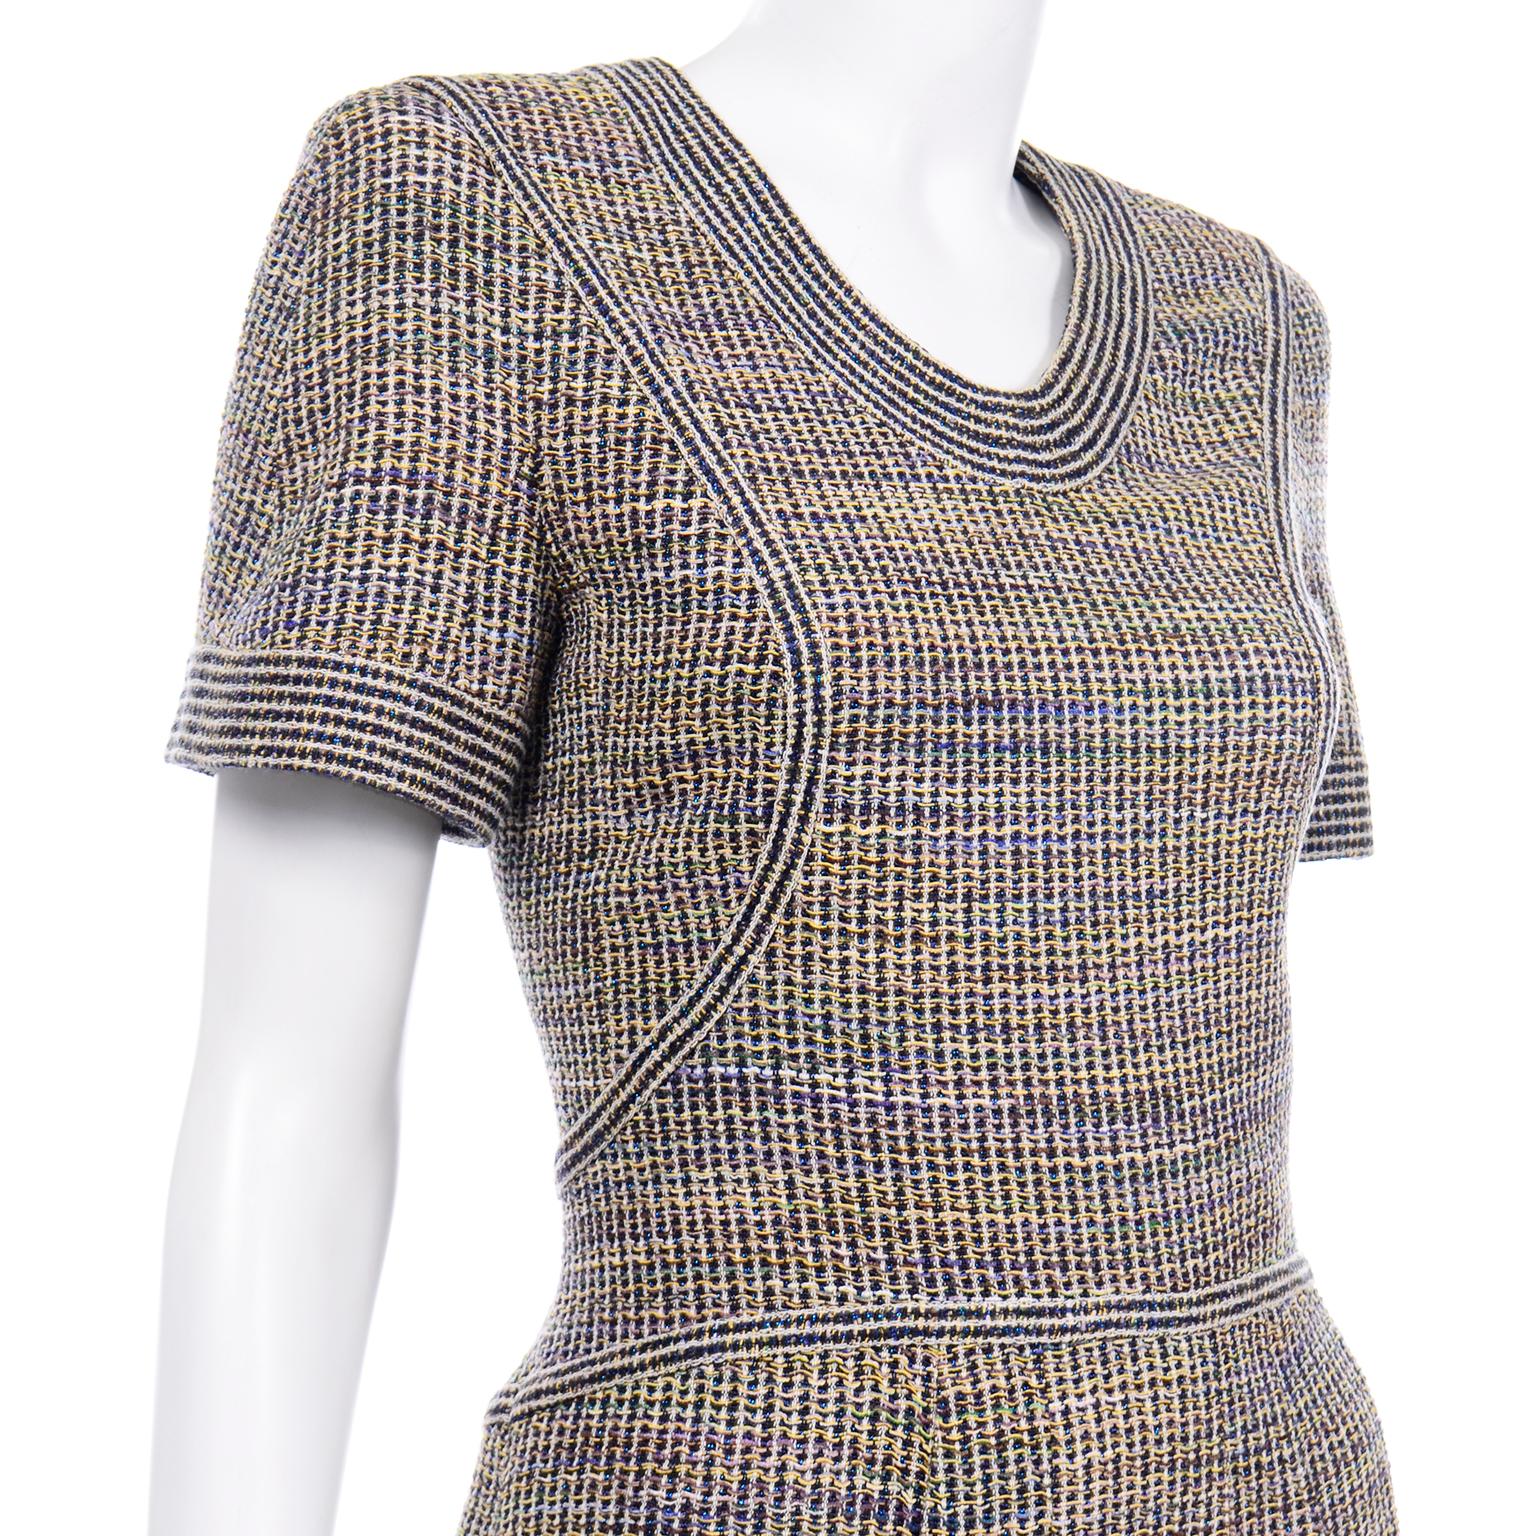 Chanel Multi-Colored Tweed Short Sleeve Dress Spring Summer 2015 In Excellent Condition For Sale In Portland, OR